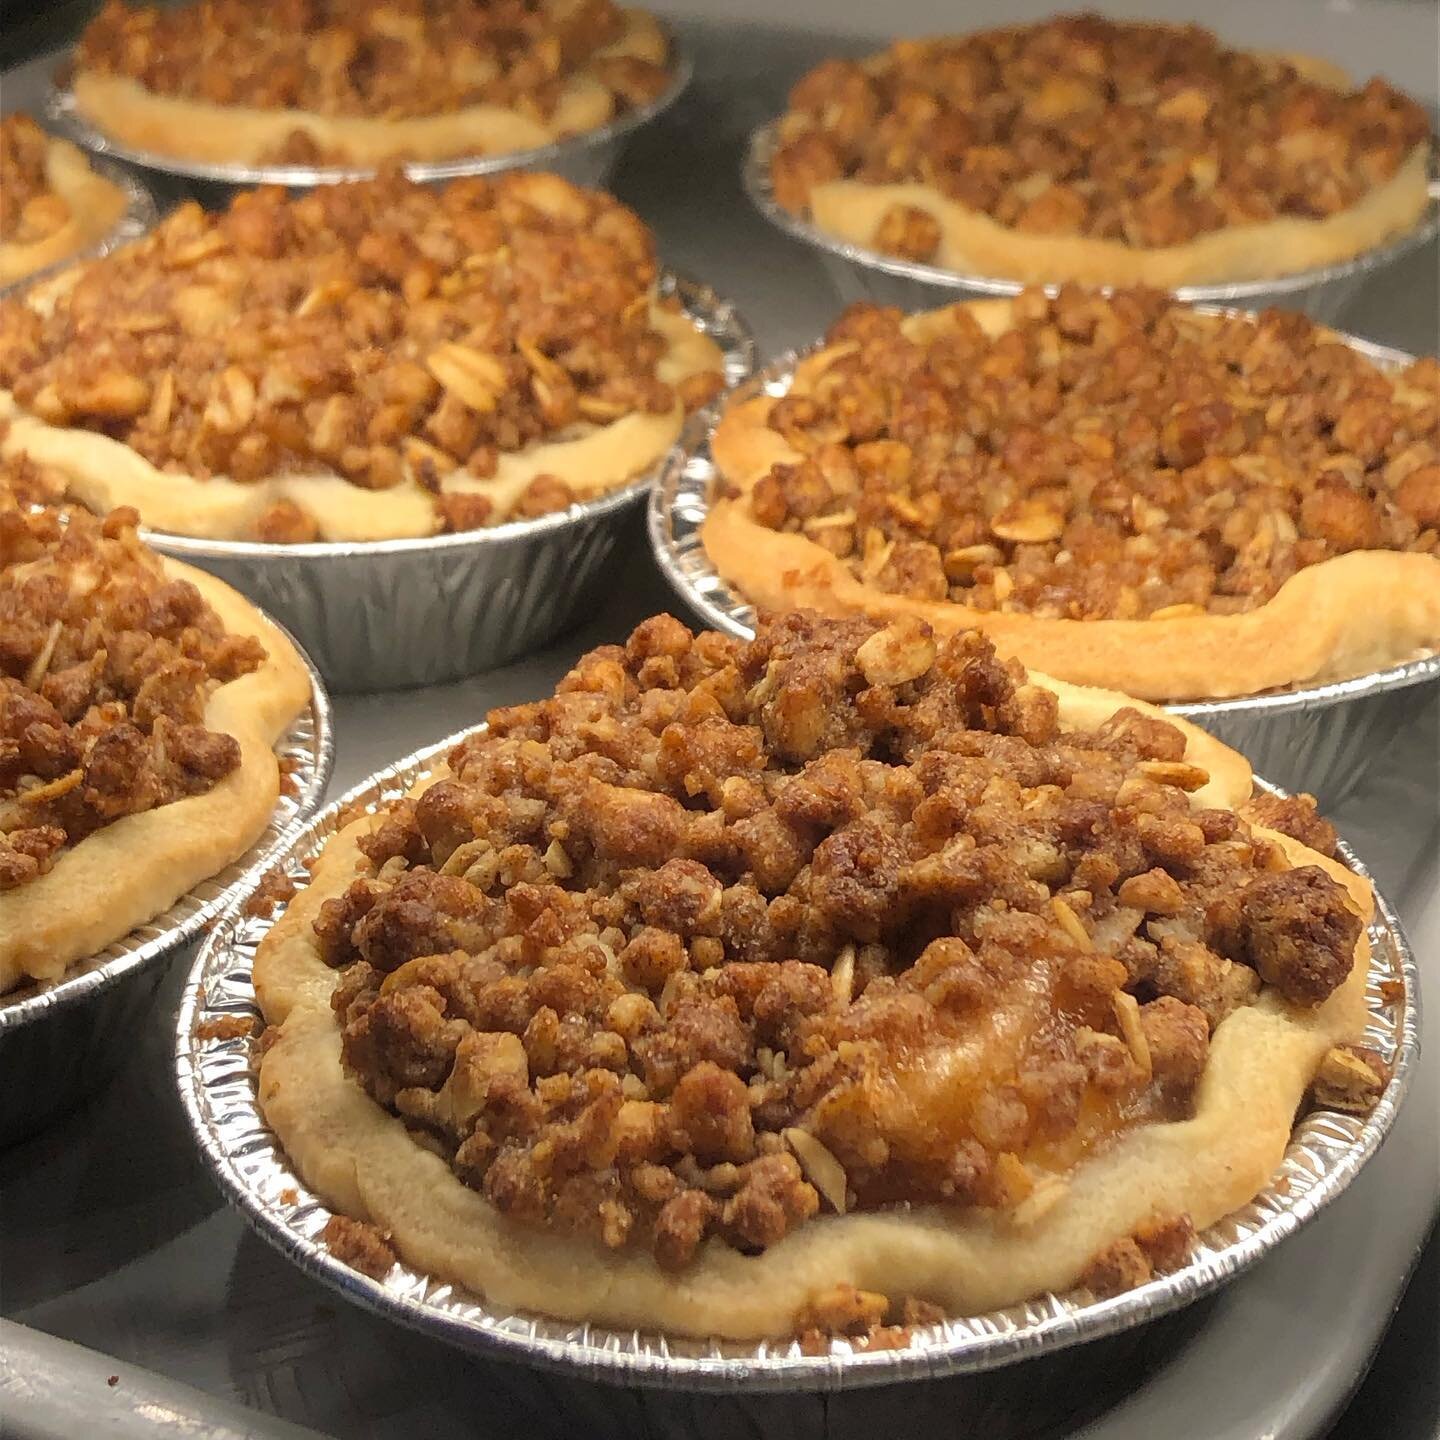 Pictured is our apple crumble tarts! 

Happy New Year patrons! We&rsquo;re pleased to report we&rsquo;ve replenished our shelves, fridges and freezers in this week we&rsquo;ve been back open from our holiday break. Stop by for soups, meat pies, froze